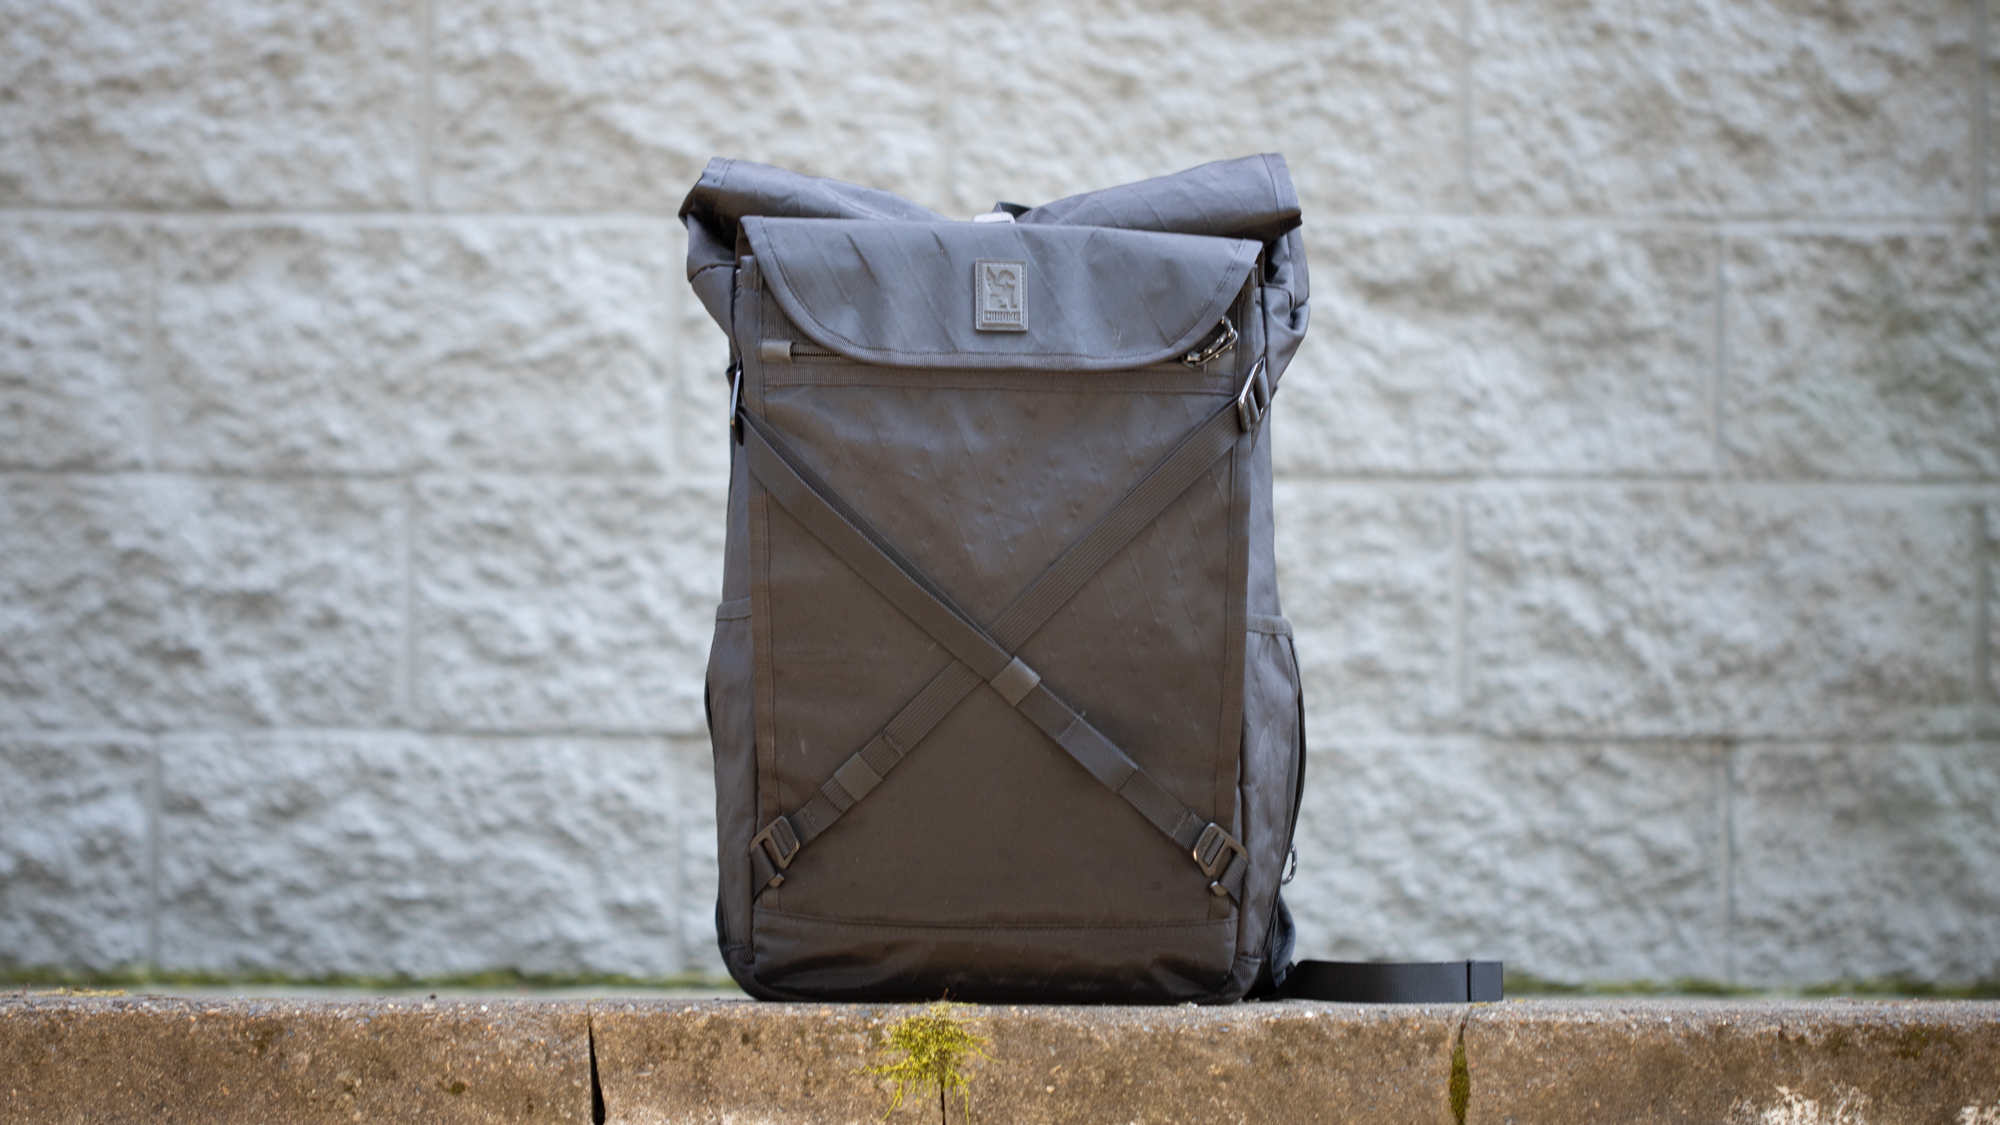 Chrome Industries Bravo 3.0 backpack review: Not just a status 